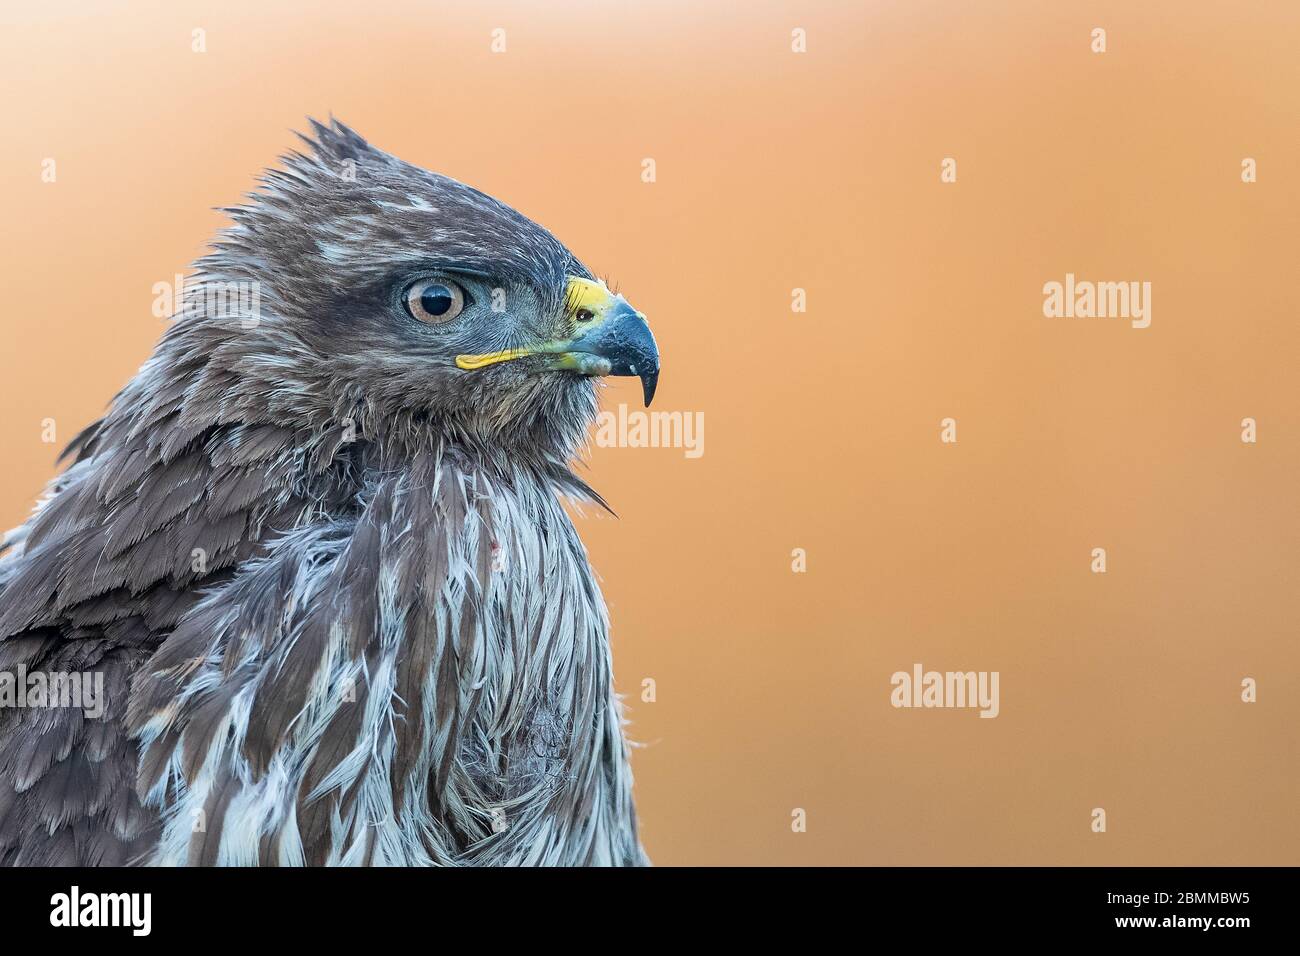 Close-up portrait of Common Buzzard (Buteo buteo) against a soft background of yellow grassland Stock Photo